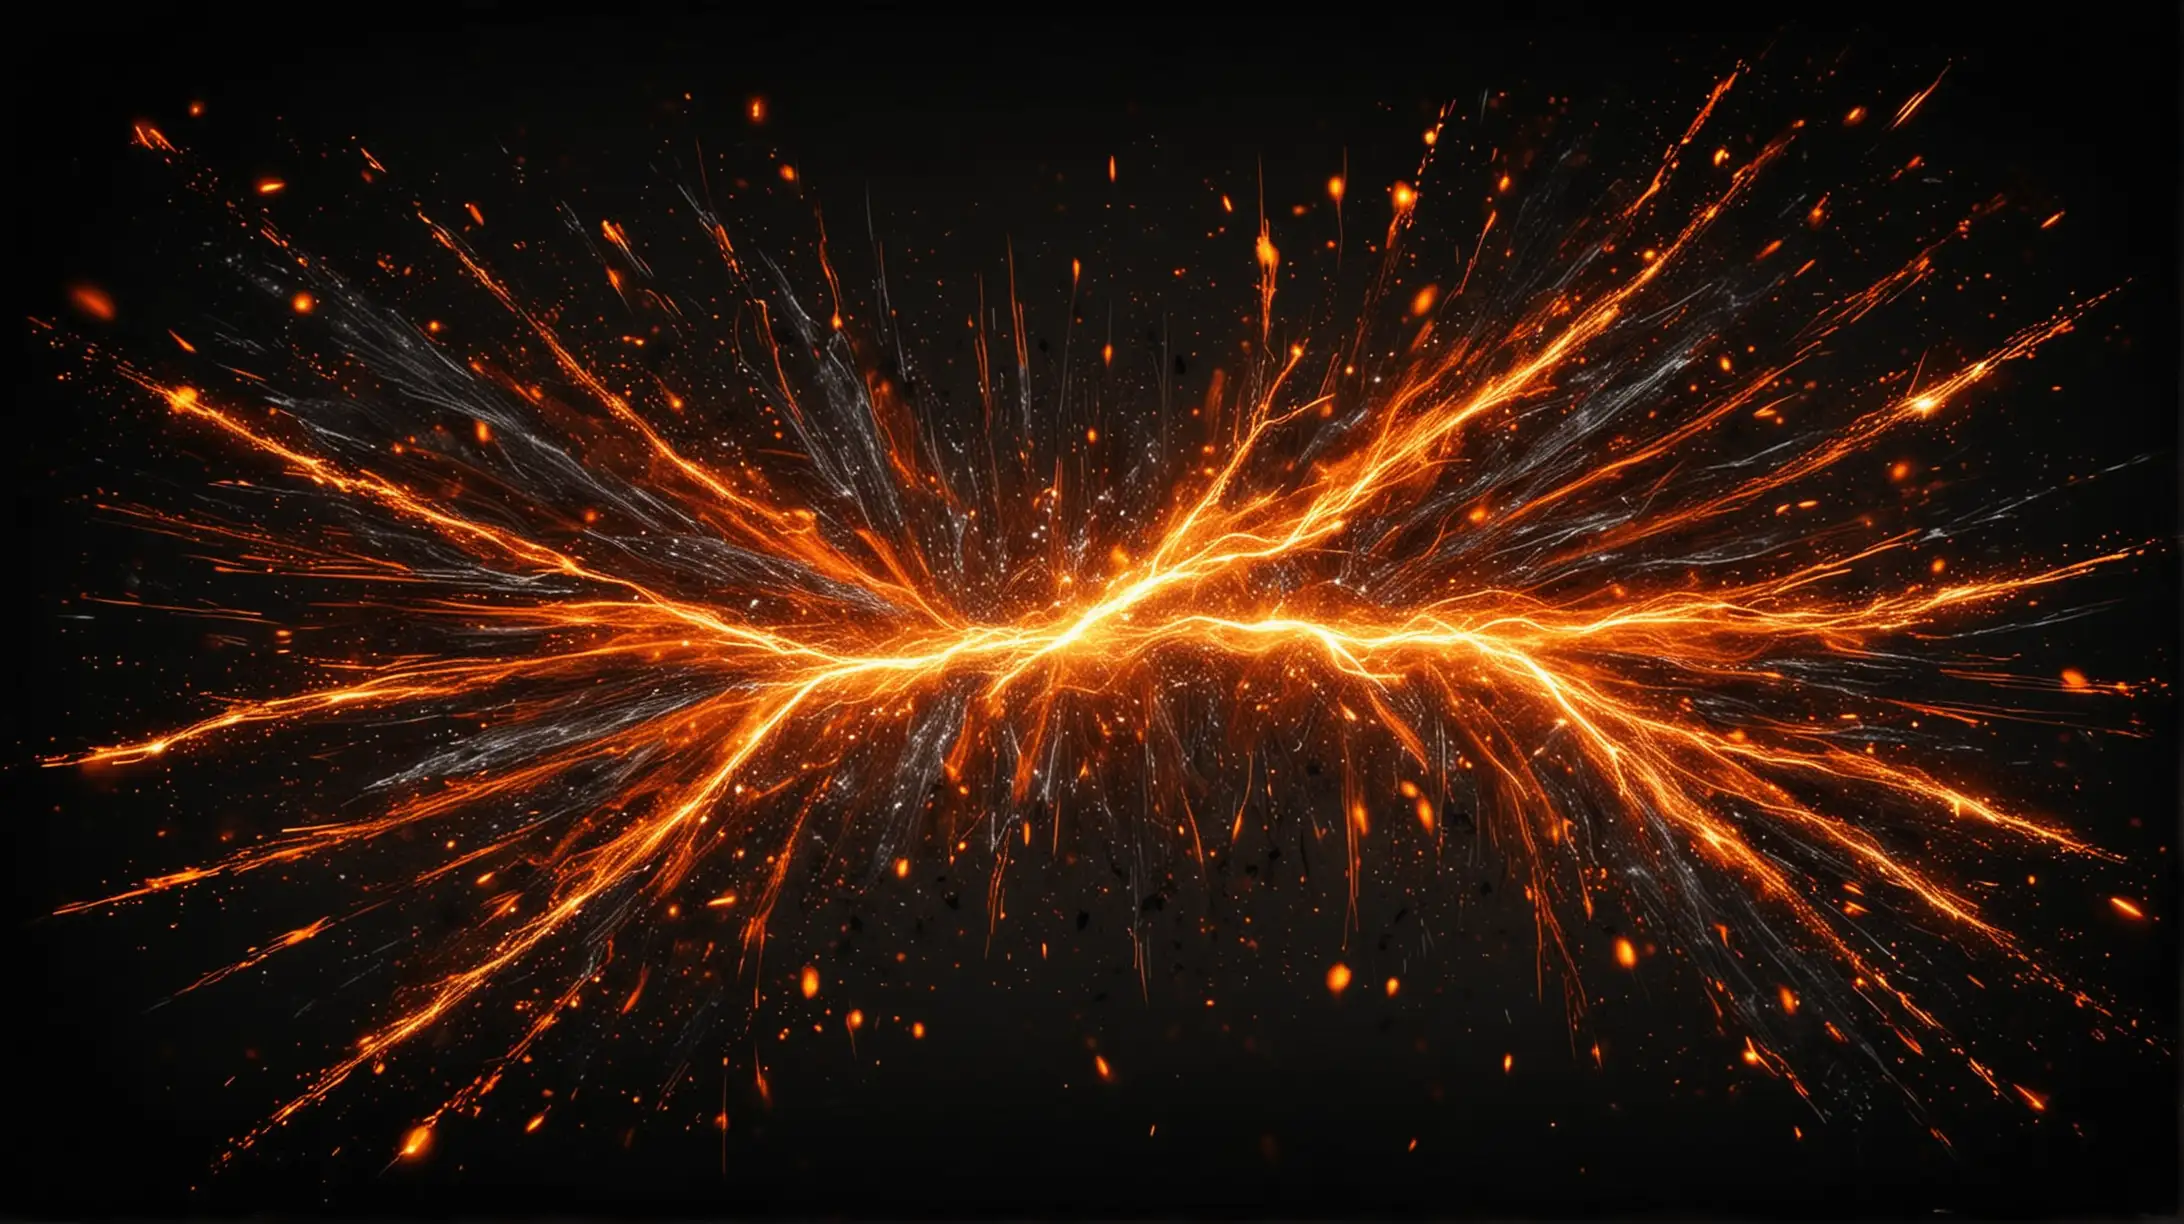 design a cool effect with a dark effect using orange and black colours with sparks flying